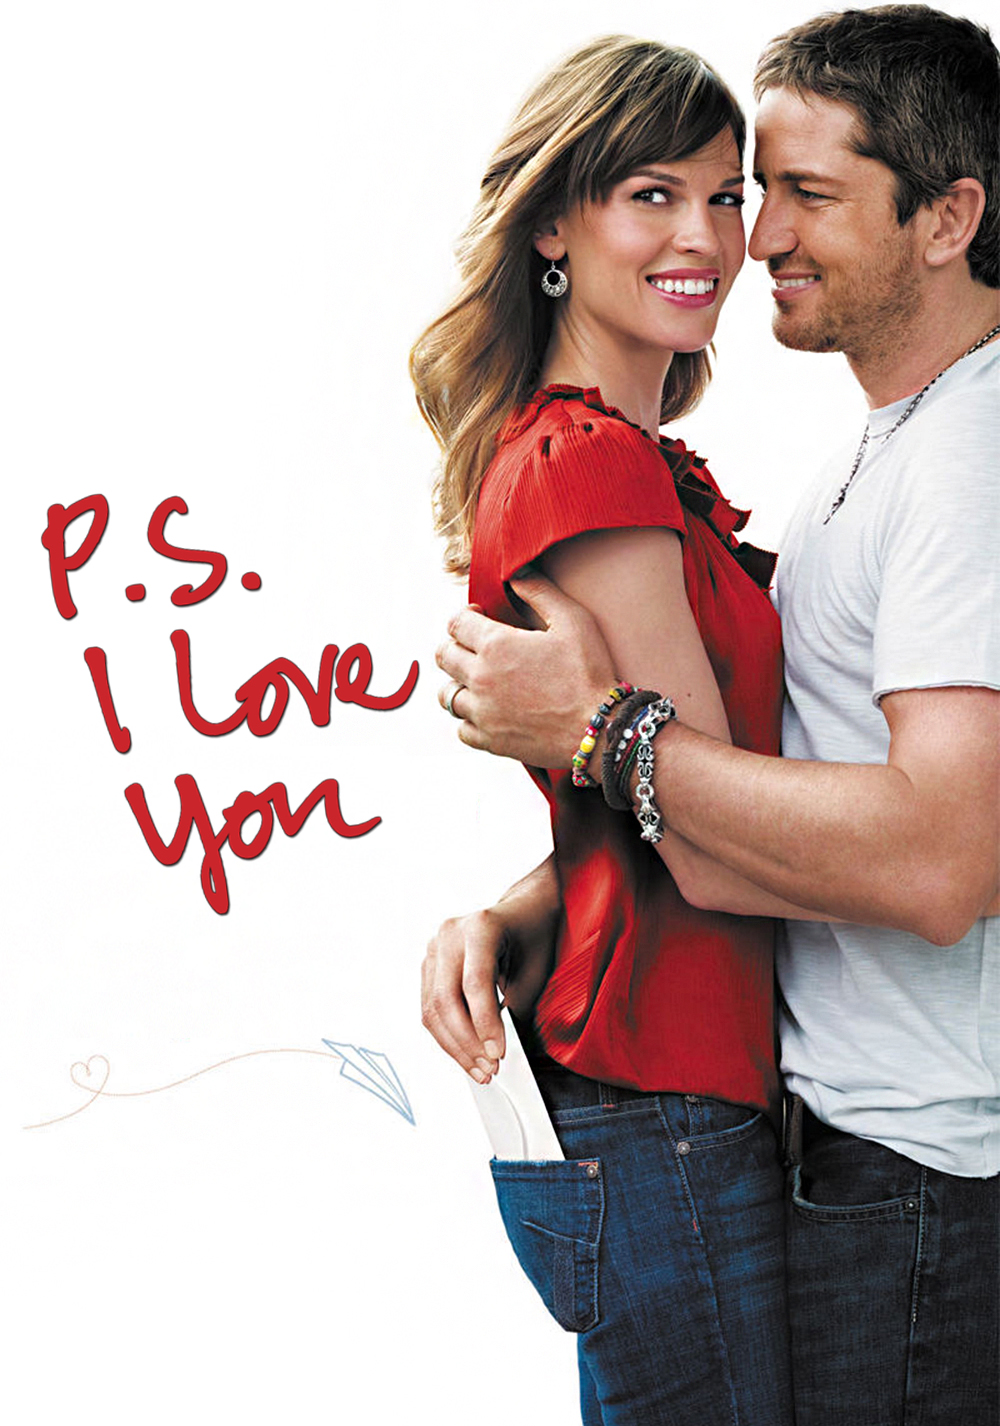 ps i love you movie review ebert